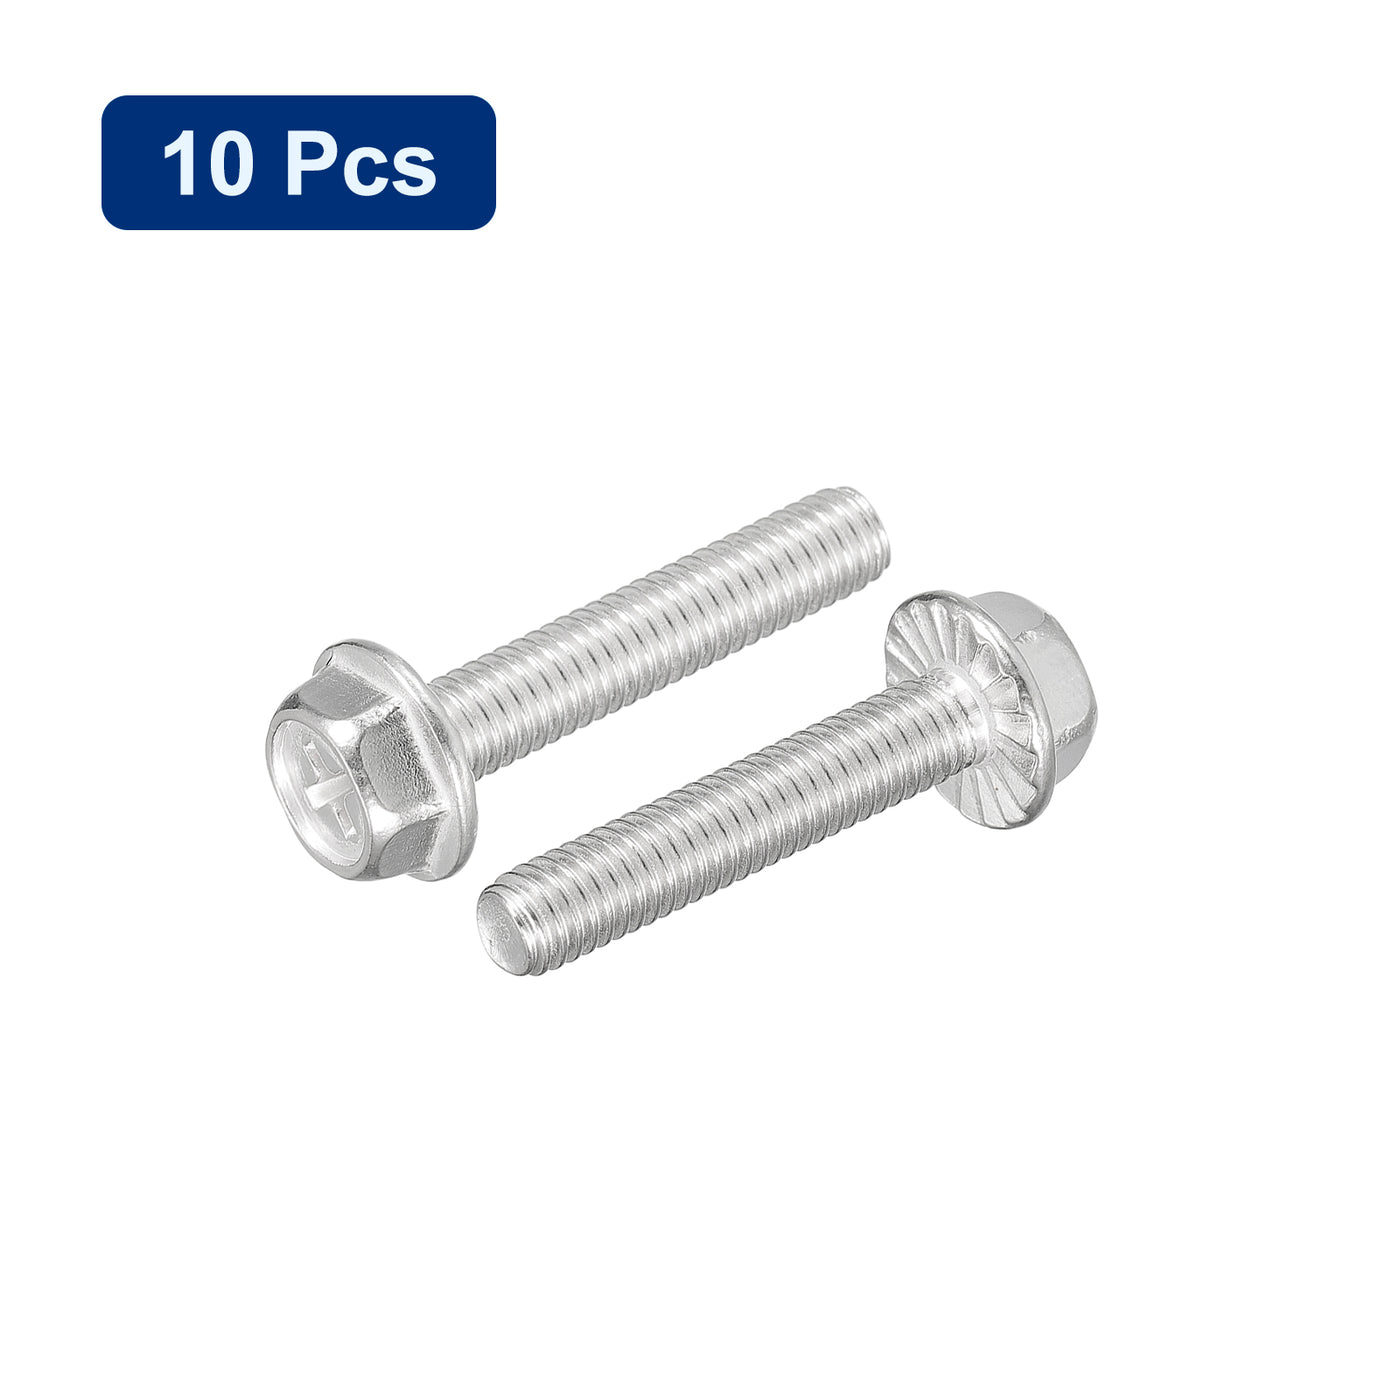 uxcell Uxcell M6x30mm Phillips Hex Head Flange Bolts, 10pcs 304 Stainless Steel Screws